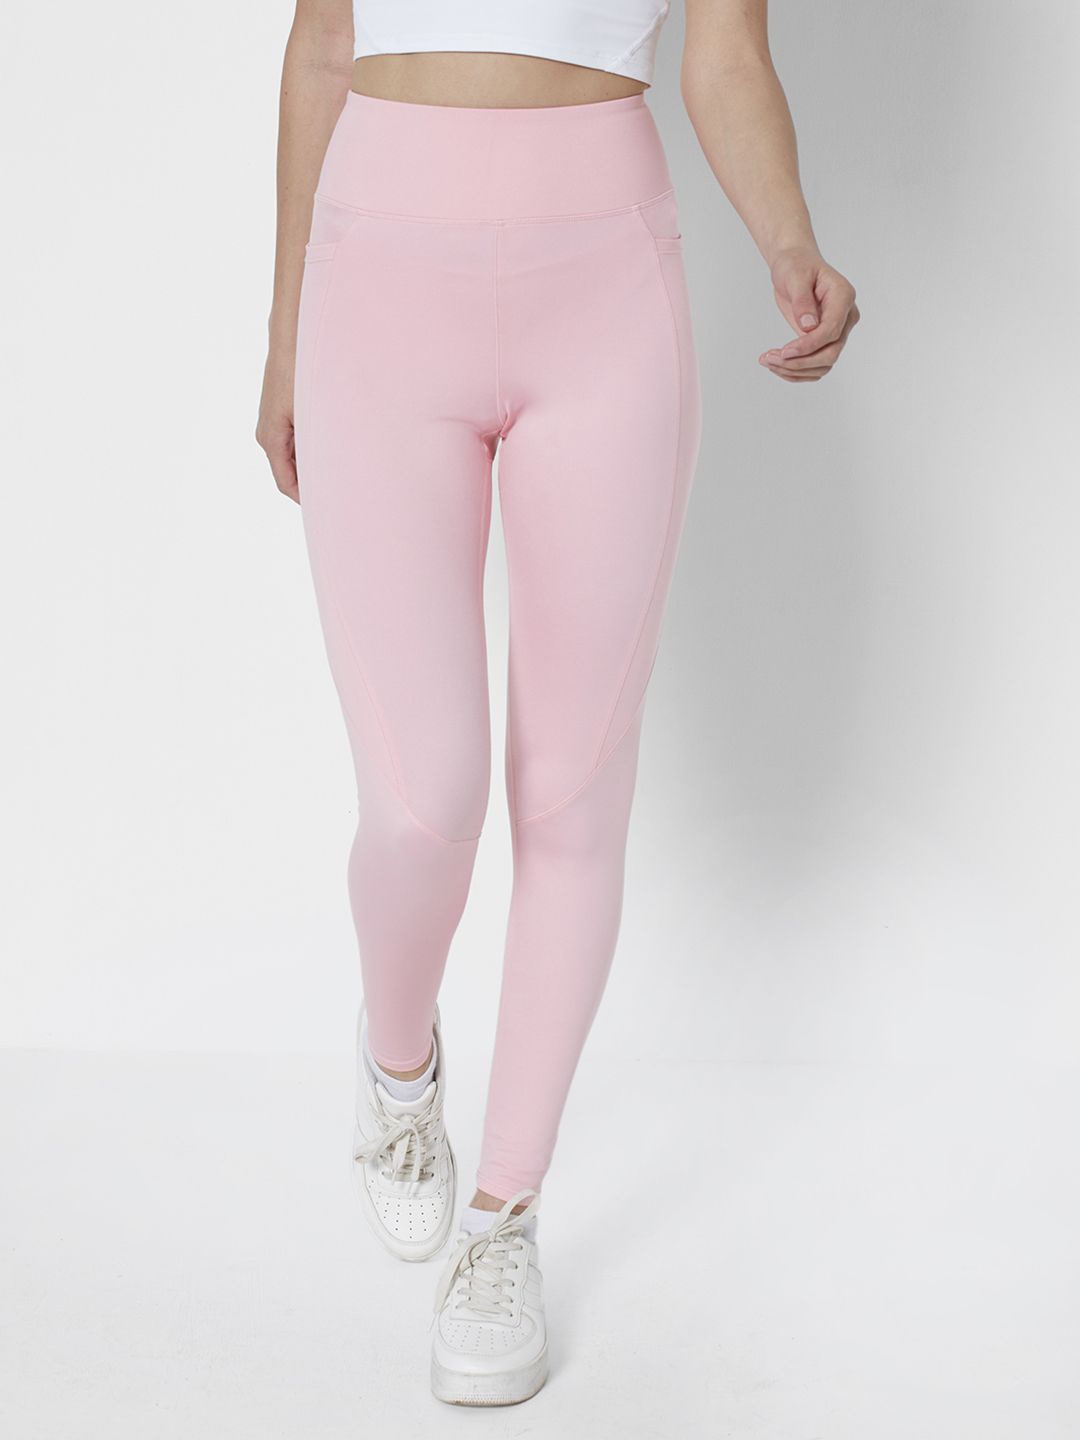 URBANIC Women Pink Solid Slim Fit Gym Tights Price in India